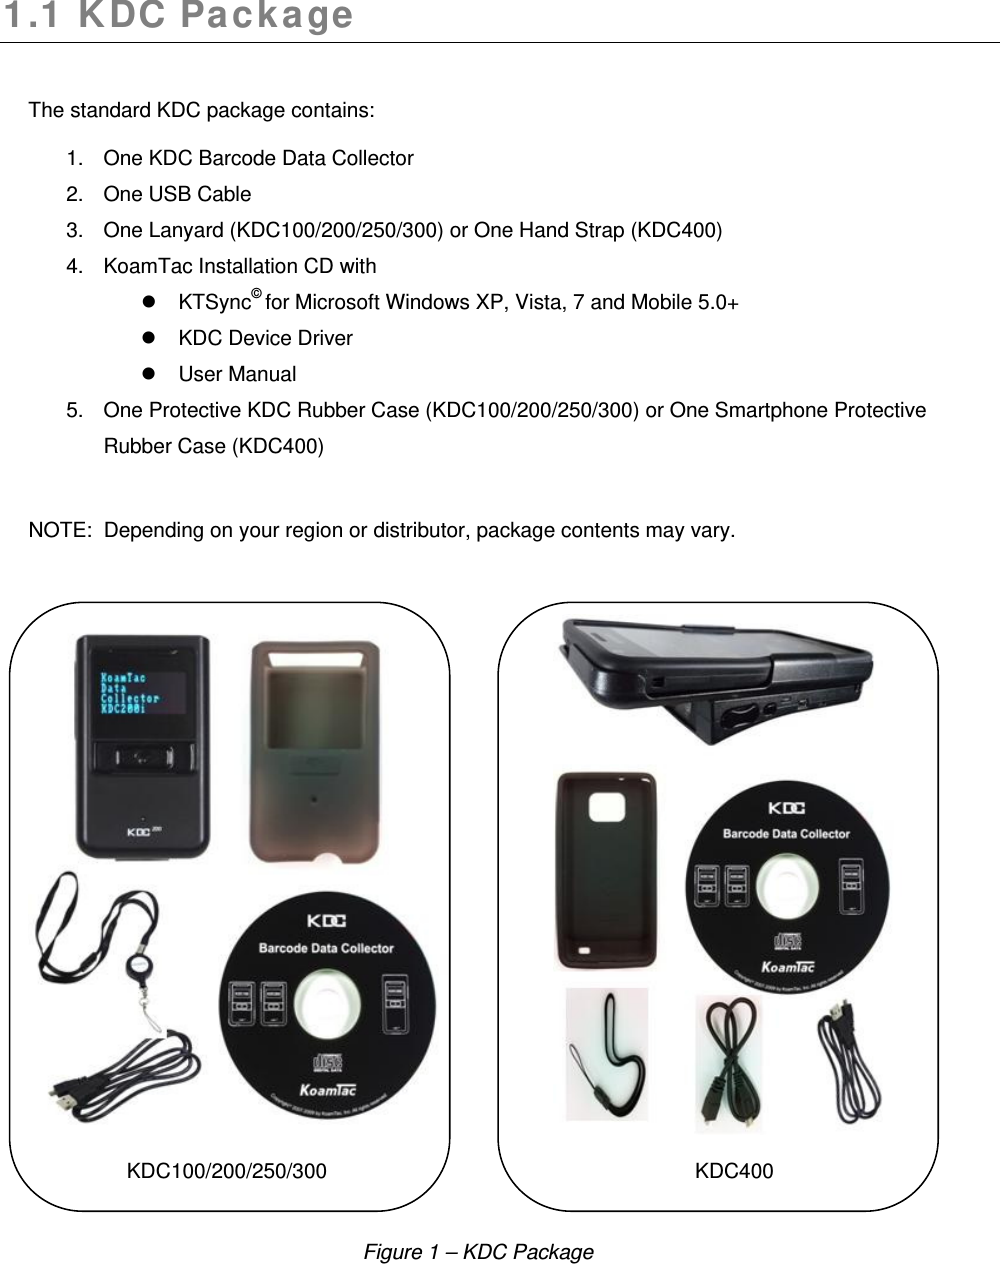 1.1 KDC Package  The standard KDC package contains: 1.  One KDC Barcode Data Collector 2.  One USB Cable 3. One Lanyard (KDC100/200/250/300) or One Hand Strap (KDC400) 4.  KoamTac Installation CD with  KTSync© for Microsoft Windows XP, Vista, 7 and Mobile 5.0+   KDC Device Driver    User Manual 5.  One Protective KDC Rubber Case (KDC100/200/250/300) or One Smartphone Protective Rubber Case (KDC400)   NOTE:  Depending on your region or distributor, package contents may vary.                                       KDC100/200/250/300                KDC400       Figure 1 – KDC Package 